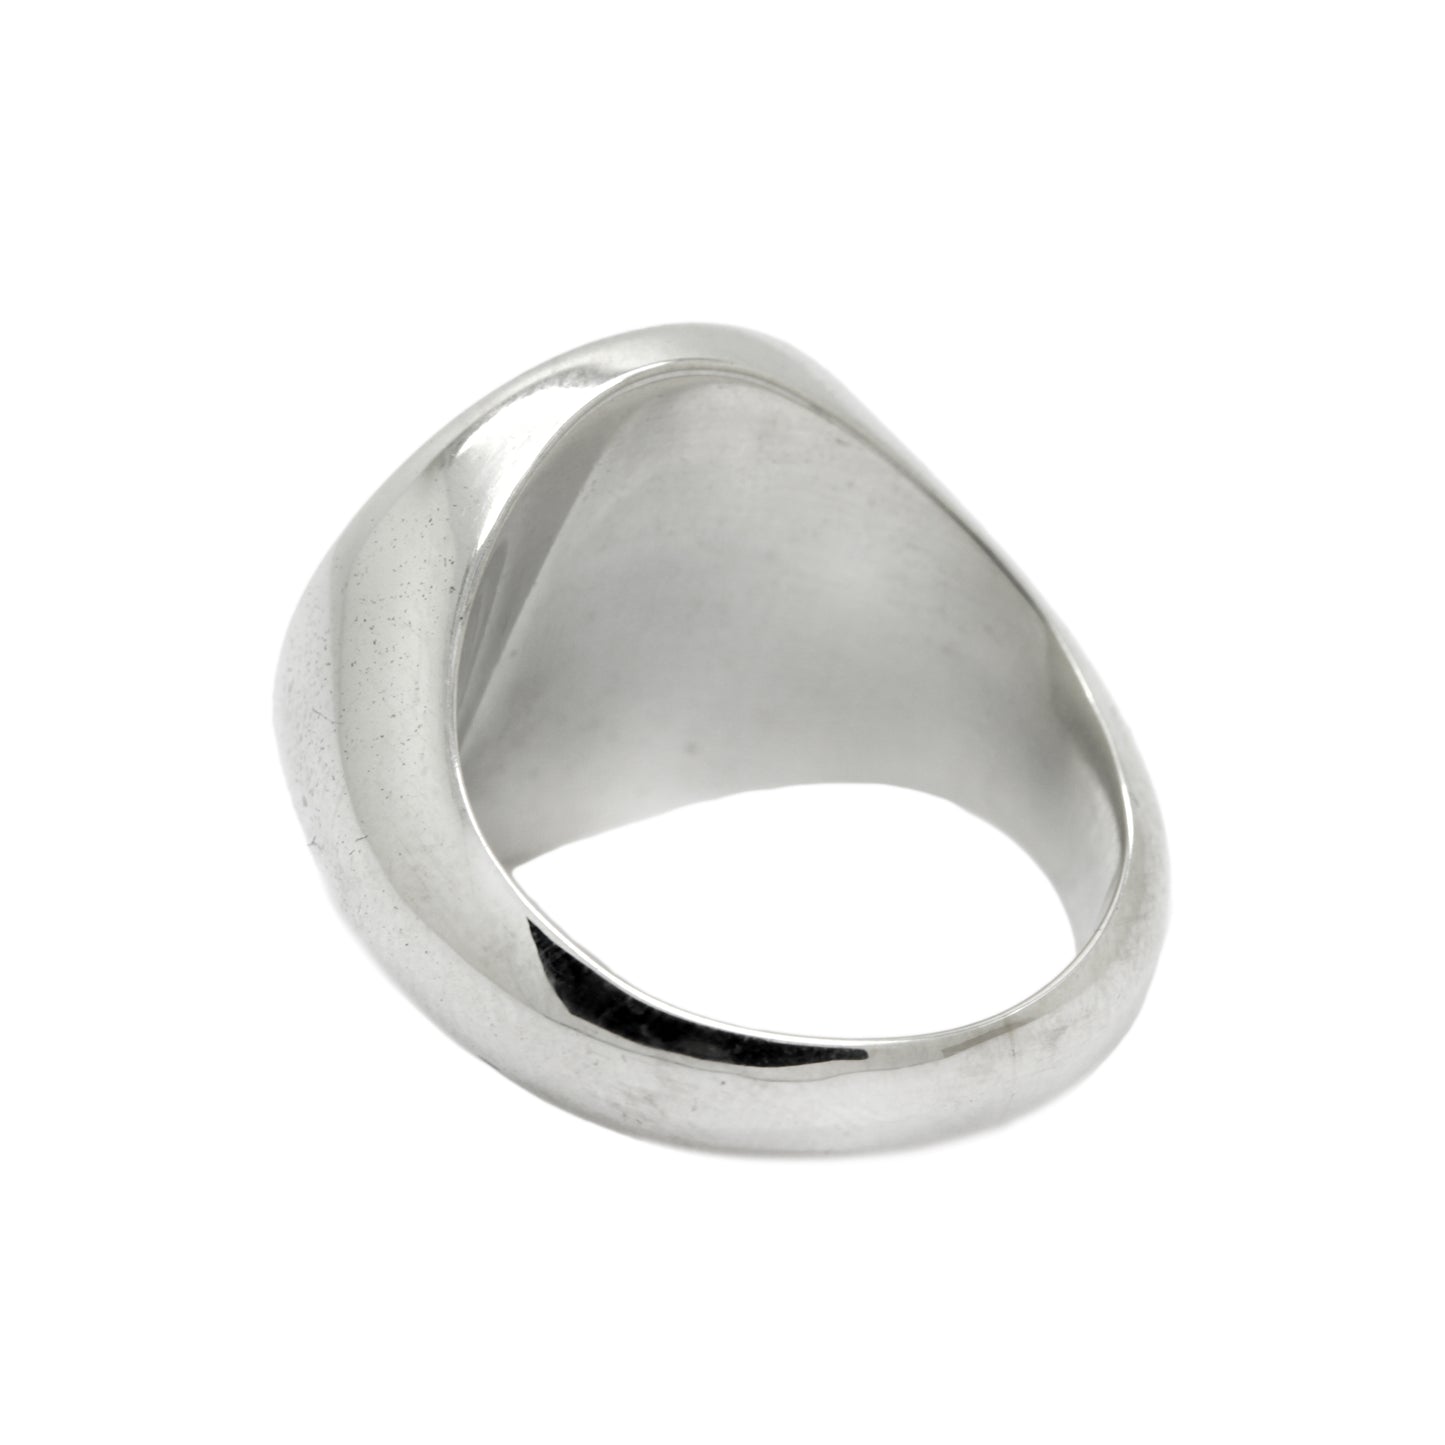 Lord Of The World by René Guénon Sterling Silver Mens Ring